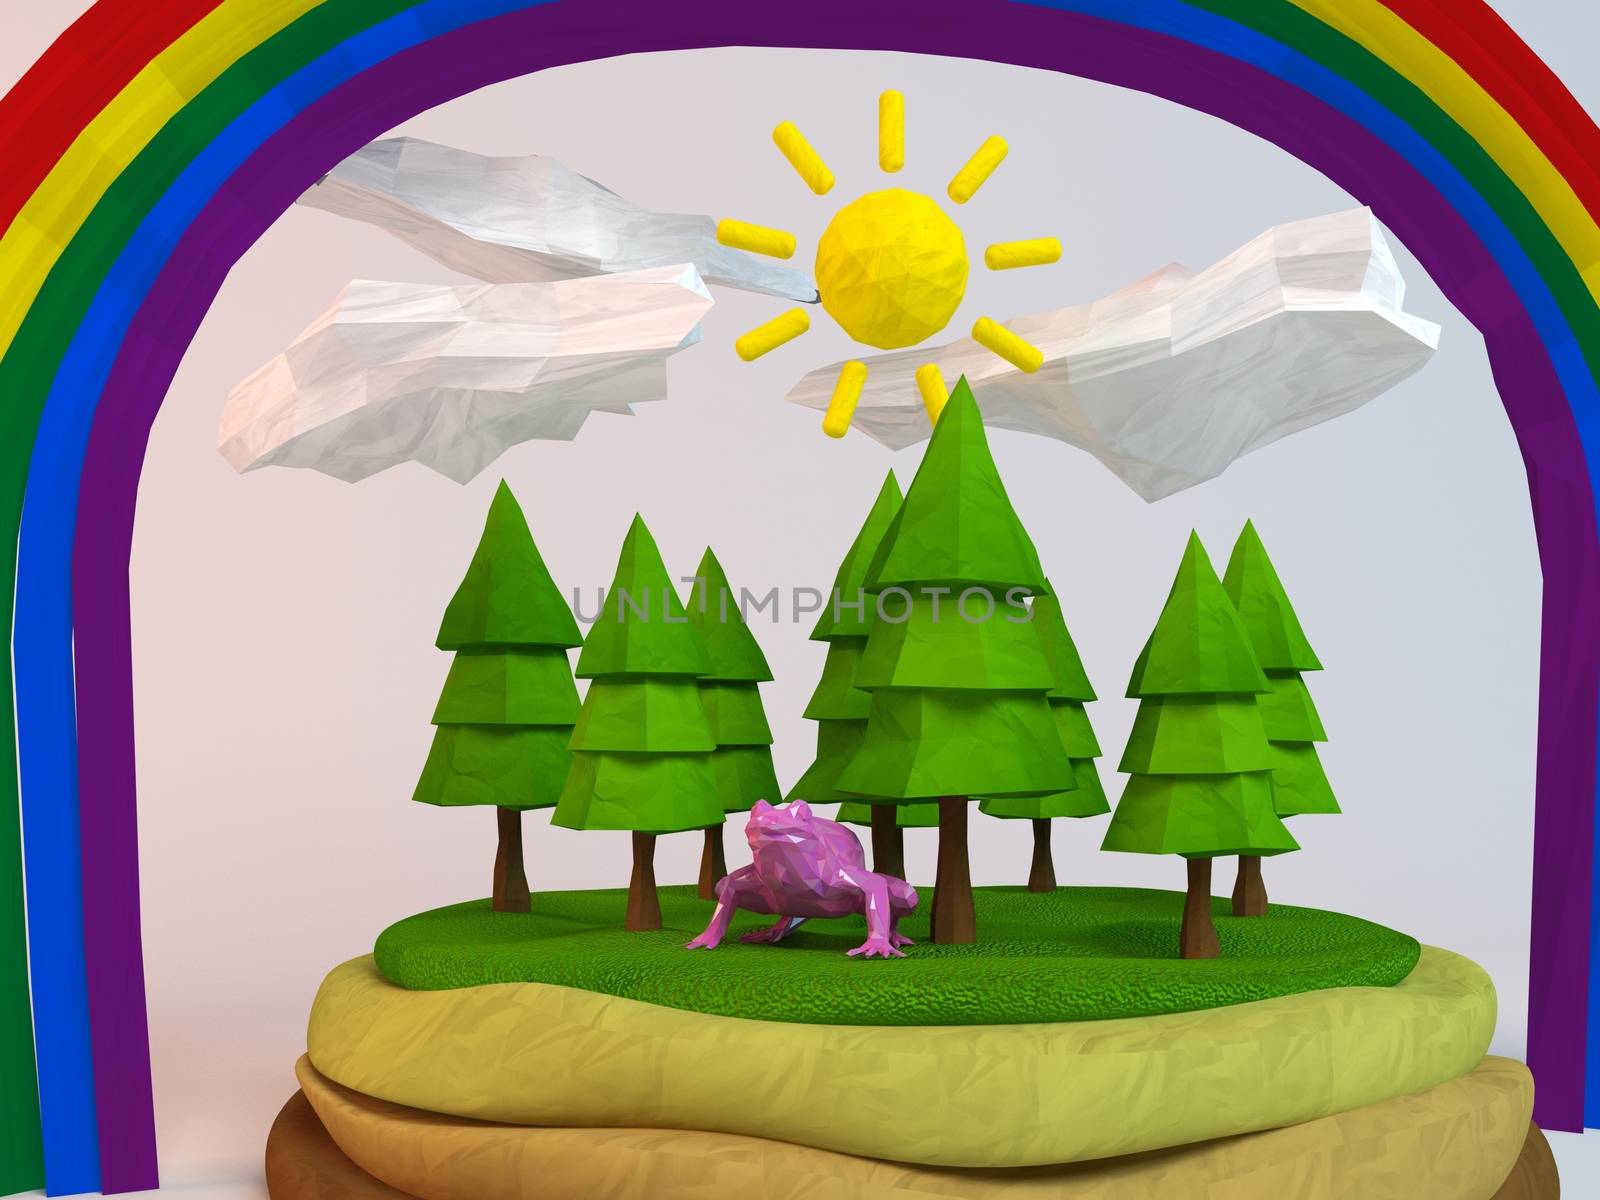 3d frog inside a low-poly green scene with sun, trees, clouds and a rainbow